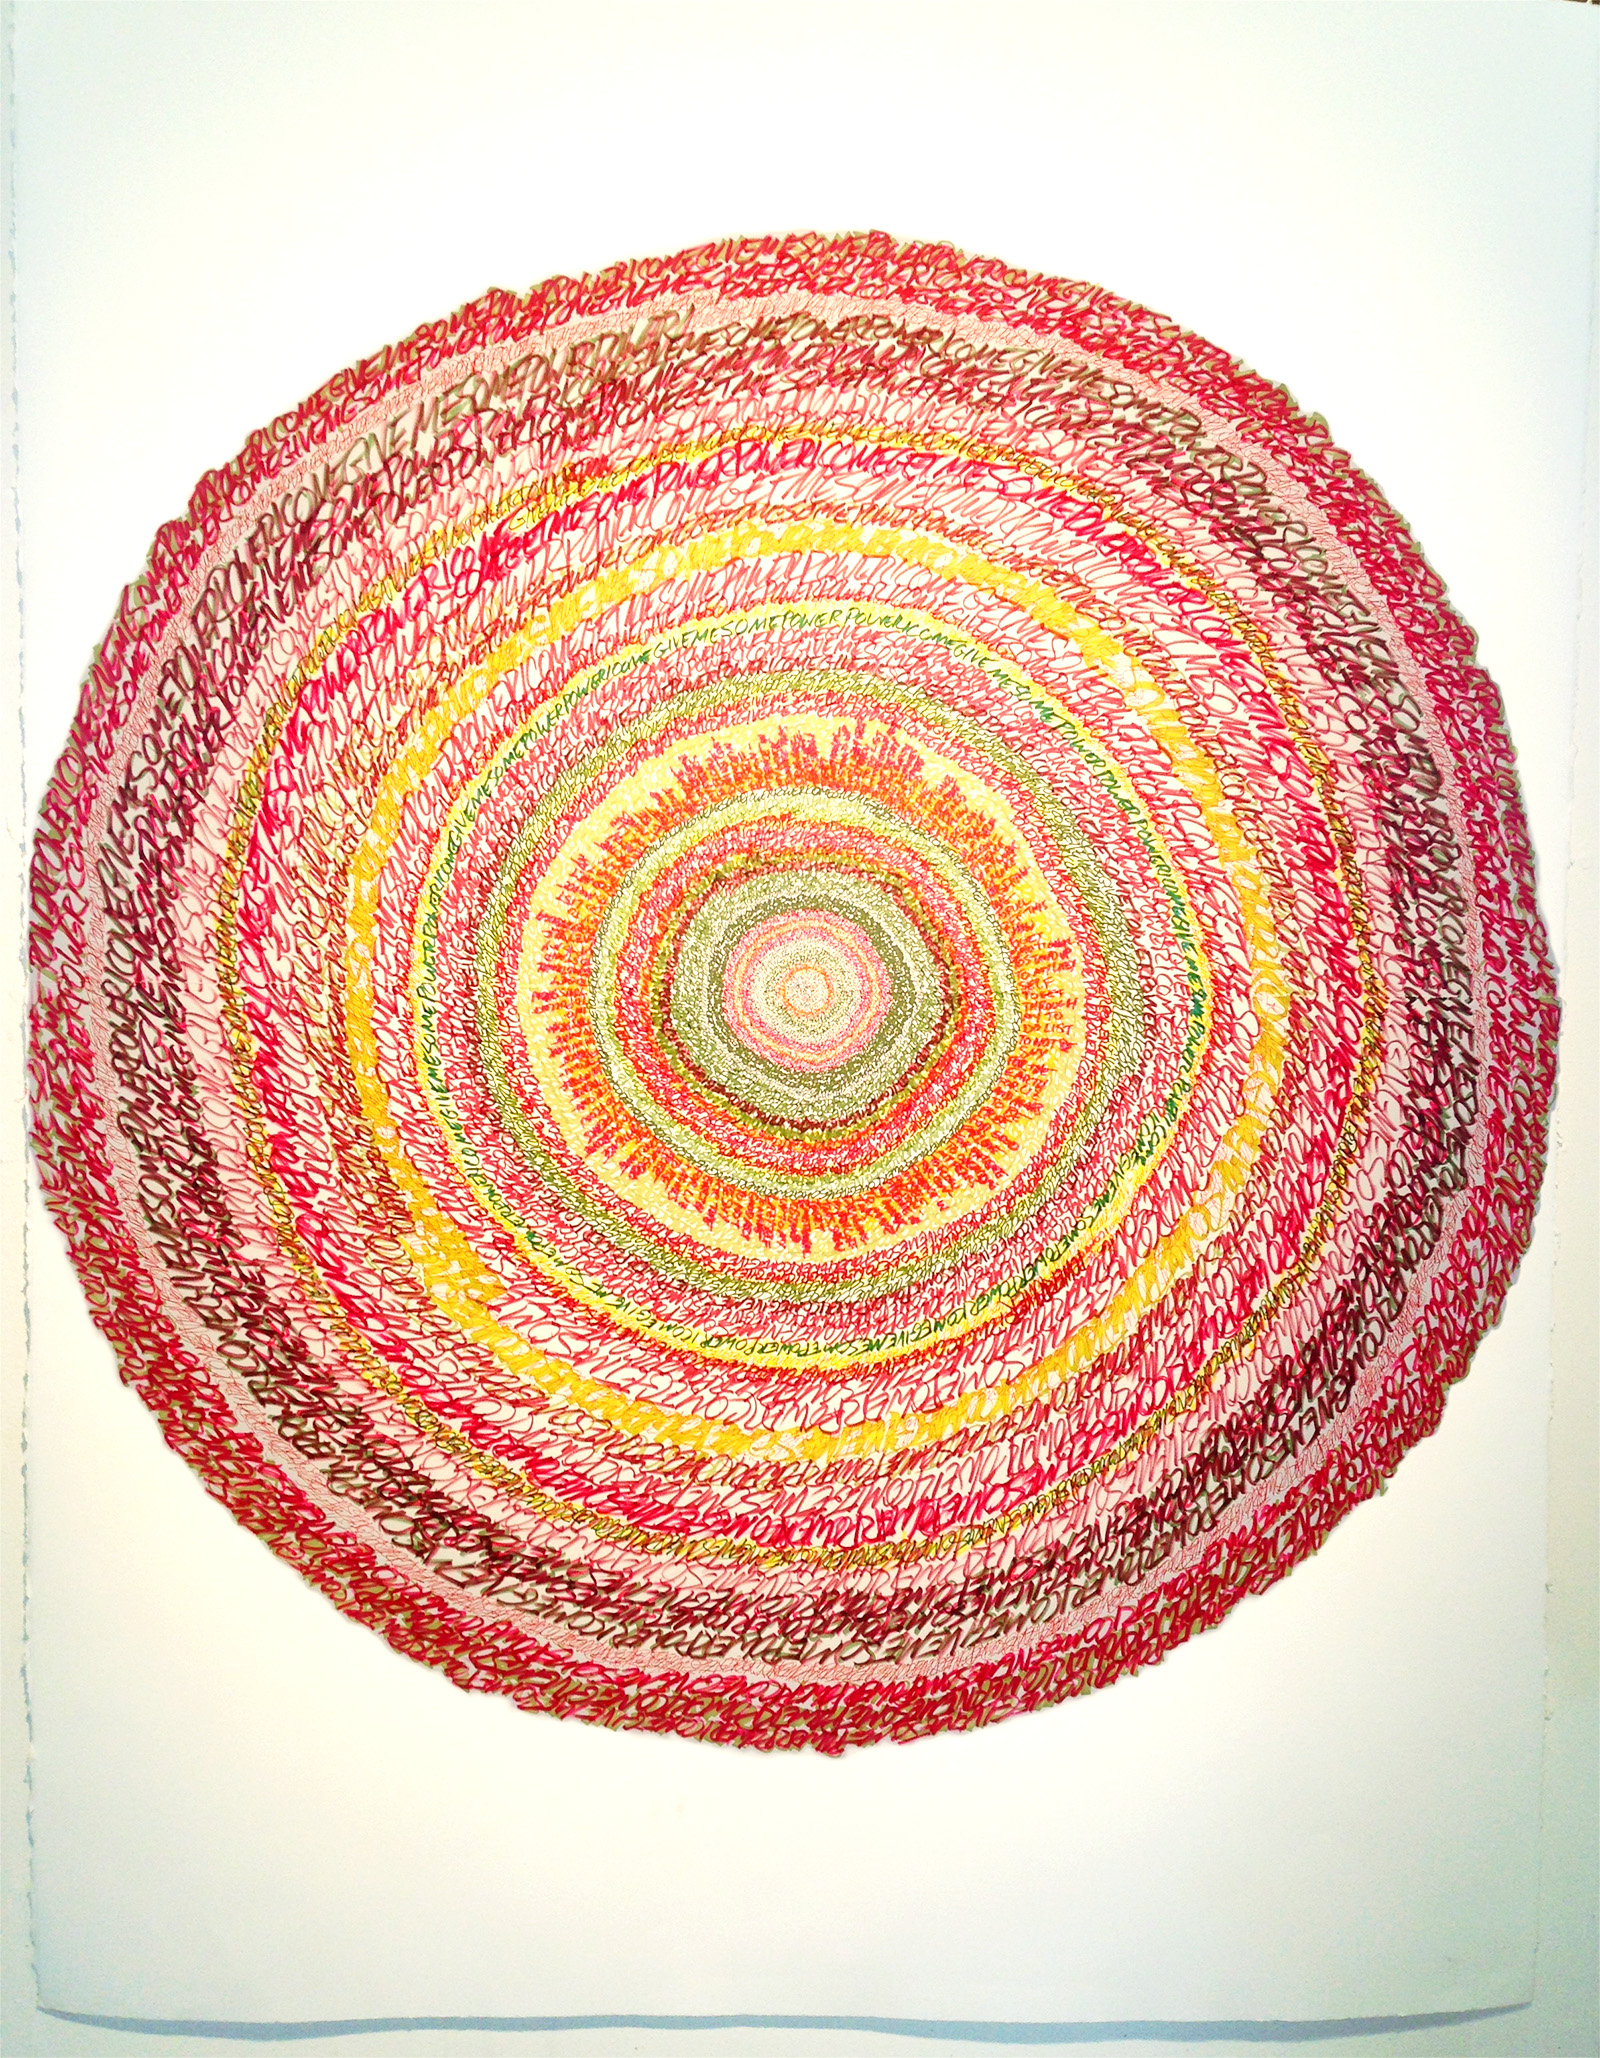 "Energy Spiral—Power Power I Come Give Me Some", 2013. Pen and marker on paper. 59 in. x 44 in.